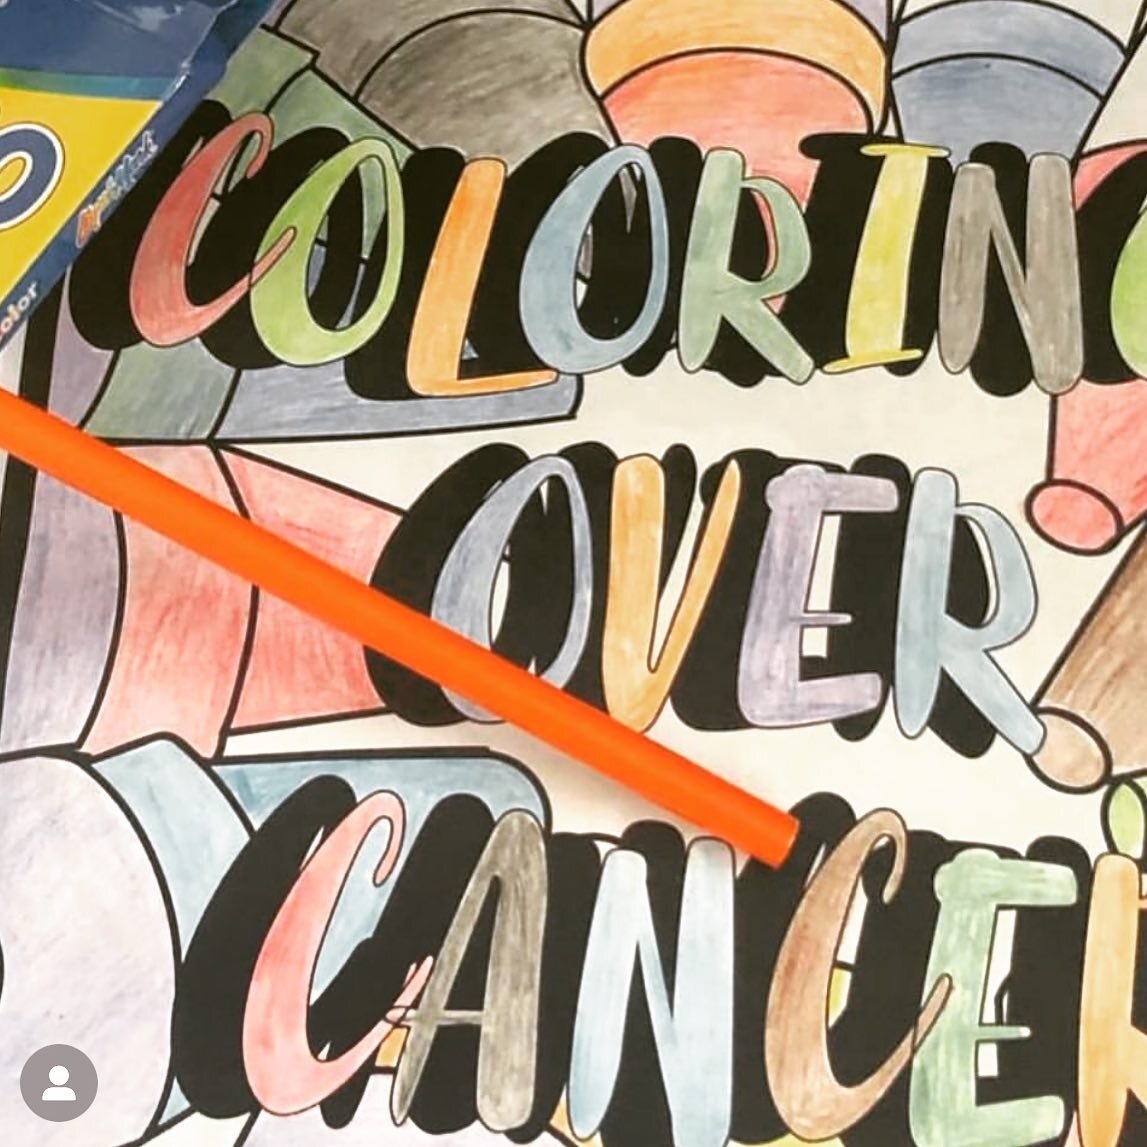 Thanks for sharing your color Tish!  #coloring #coloringbook #coloringtherapy #art #arttherapy #share #shareyourcolor #colorful #color  www.coloringovercancer.com